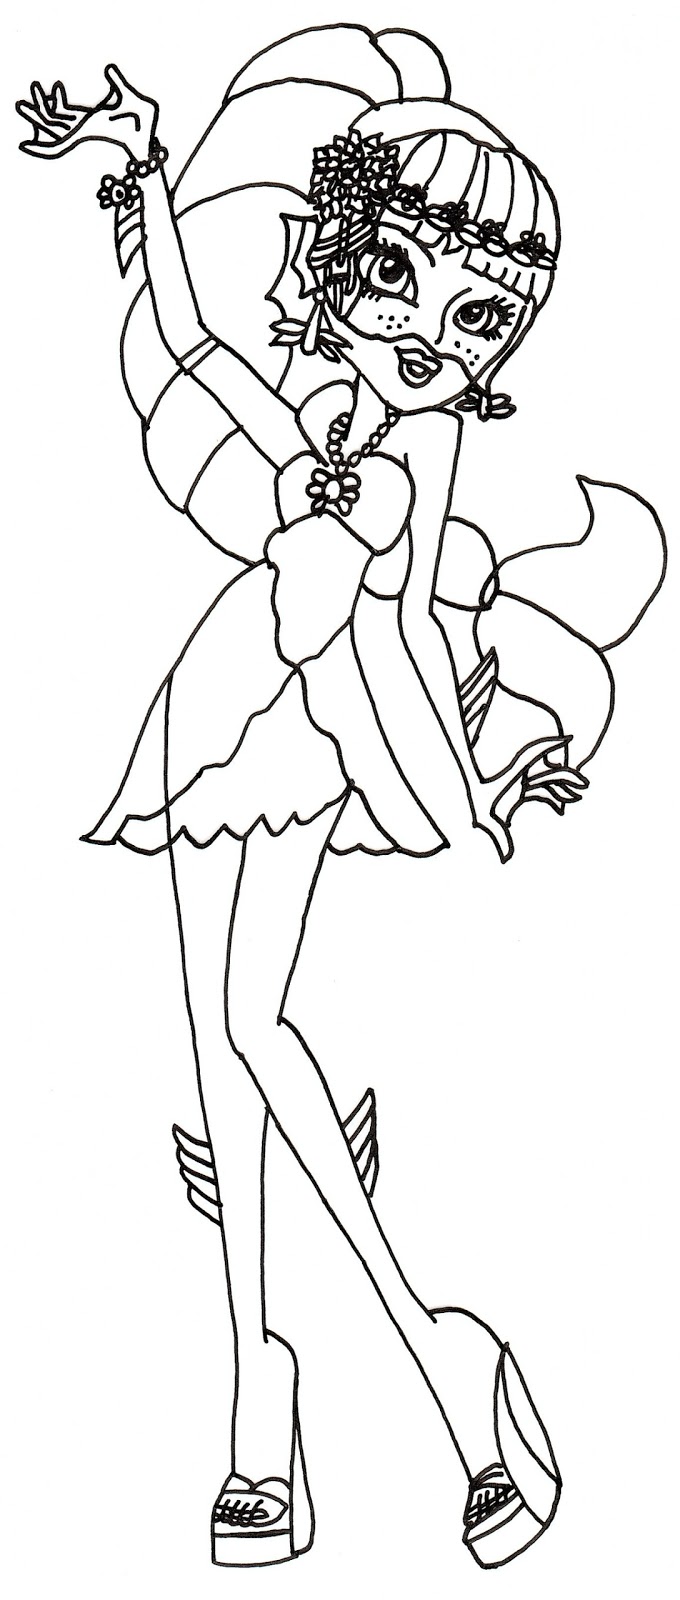 Free printable monster high coloring sheet for Lagoona Blue in 13 wishes basic doll assortment